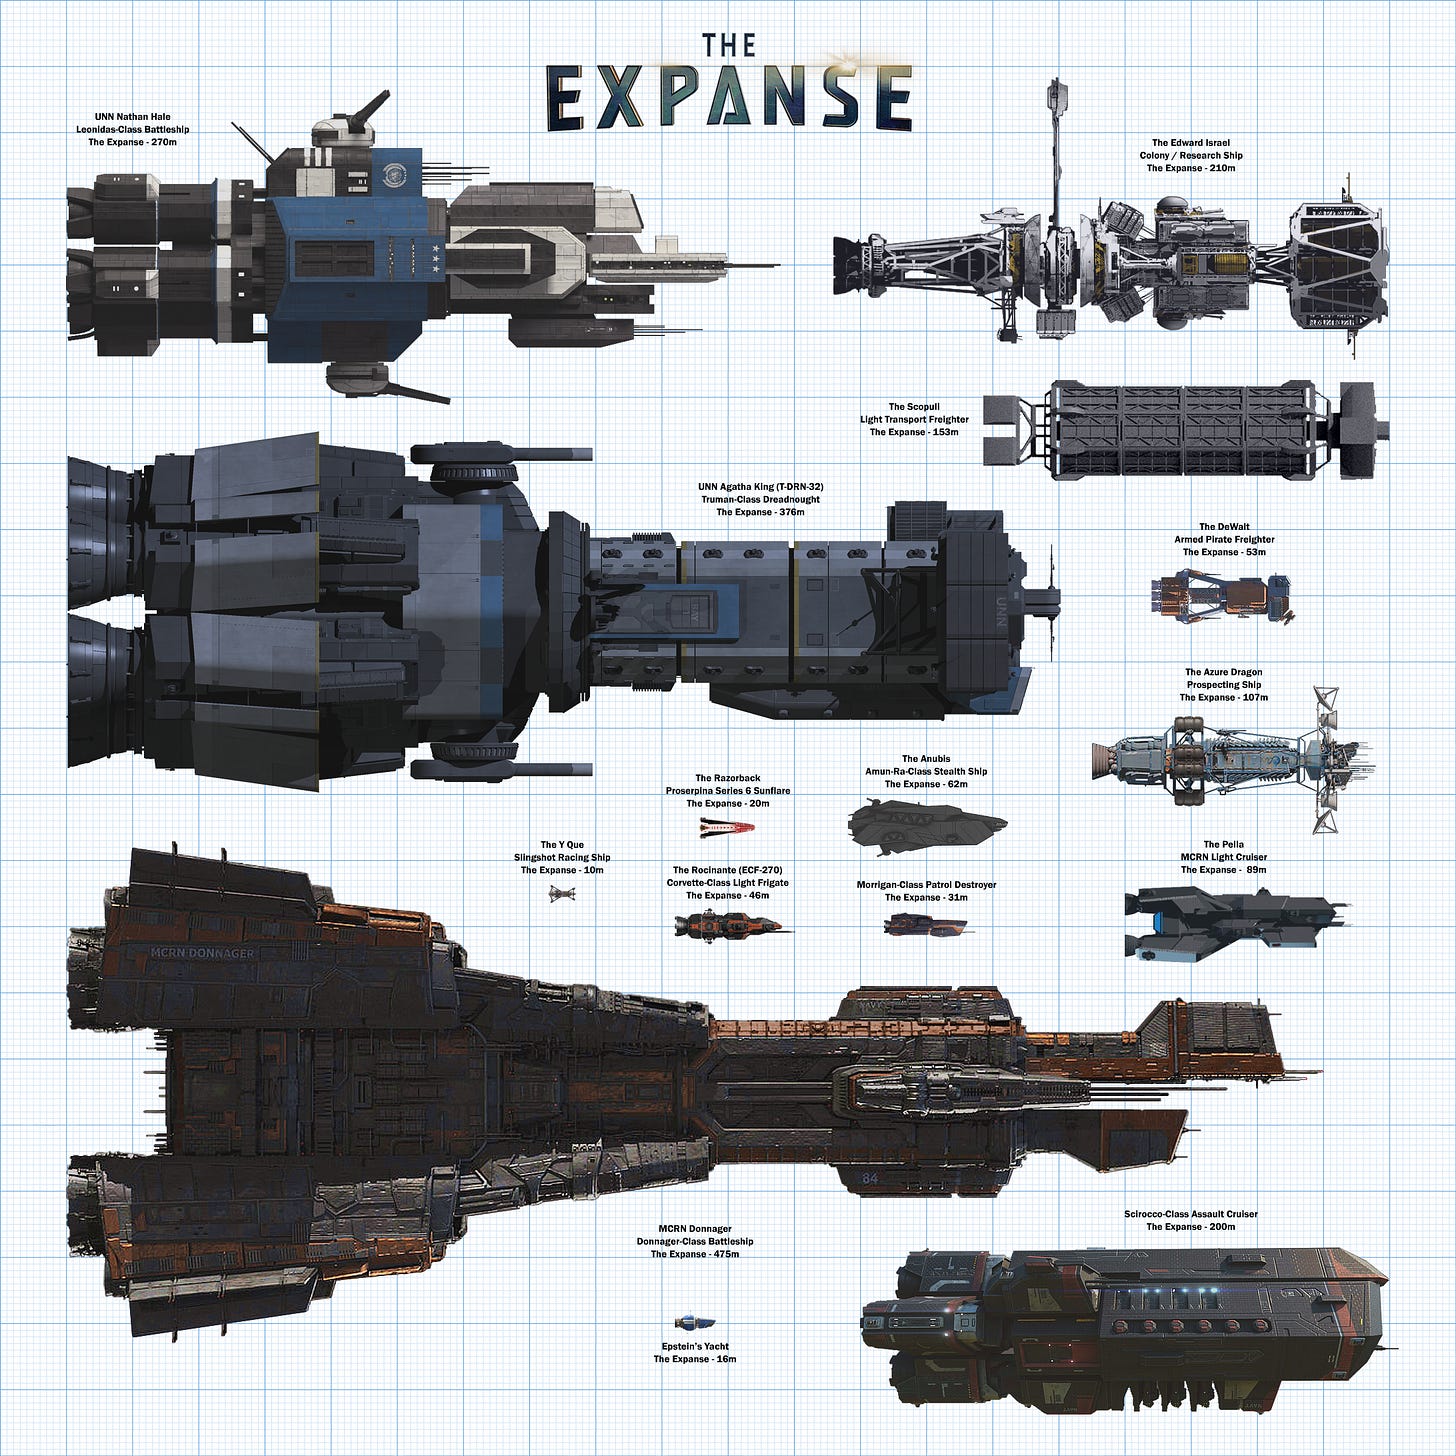 The Expanse Ships (2x)